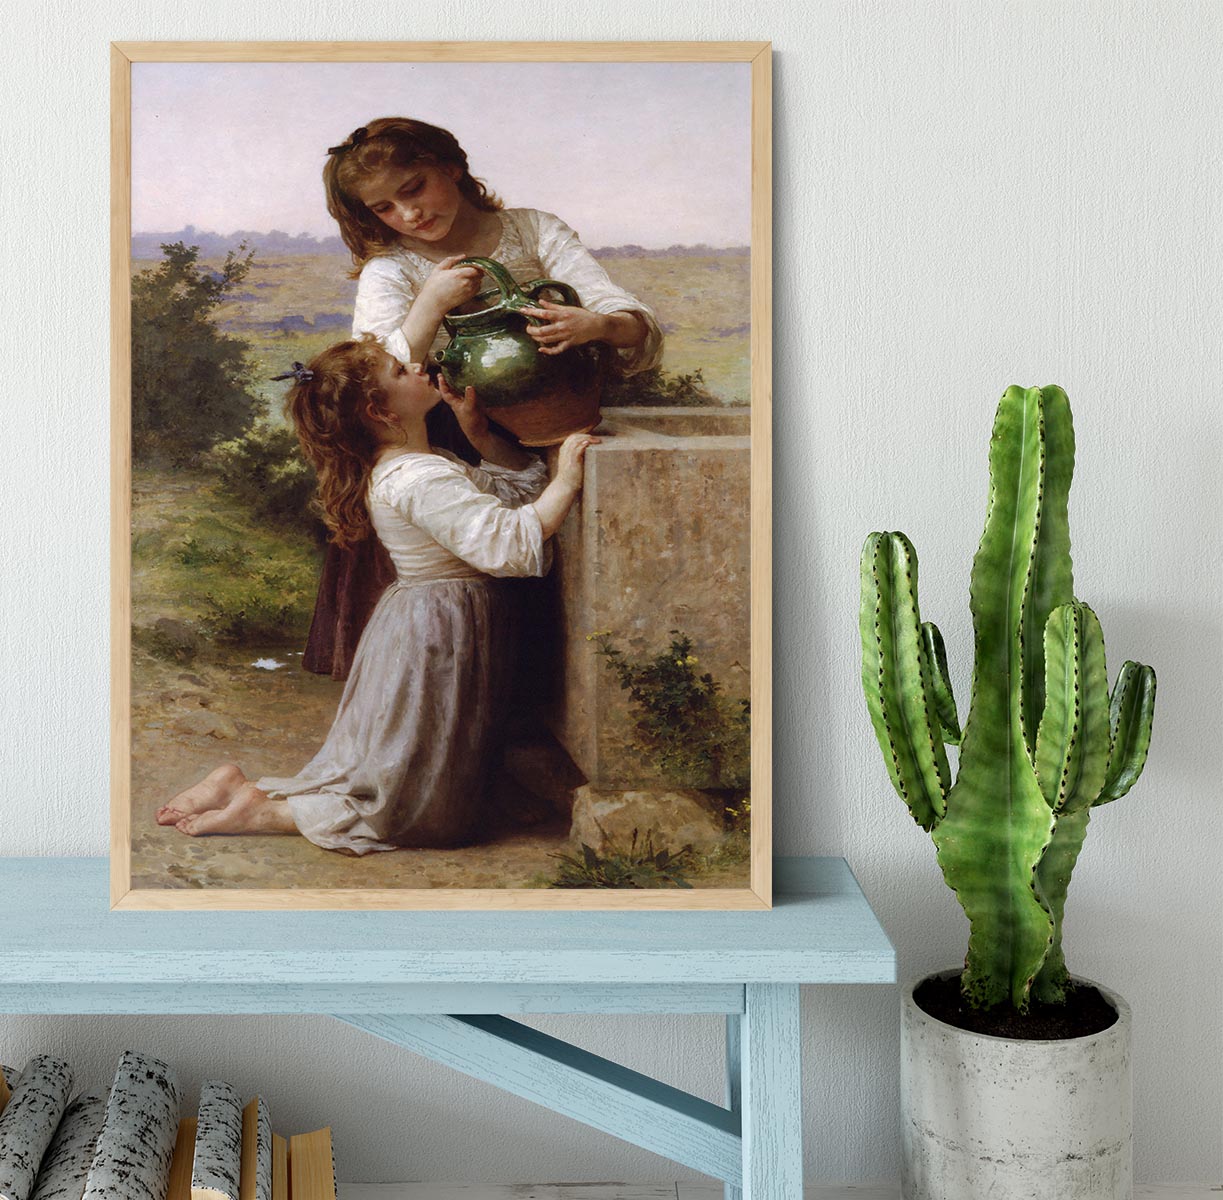 At The Fountain By Bouguereau Framed Print - Canvas Art Rocks - 4